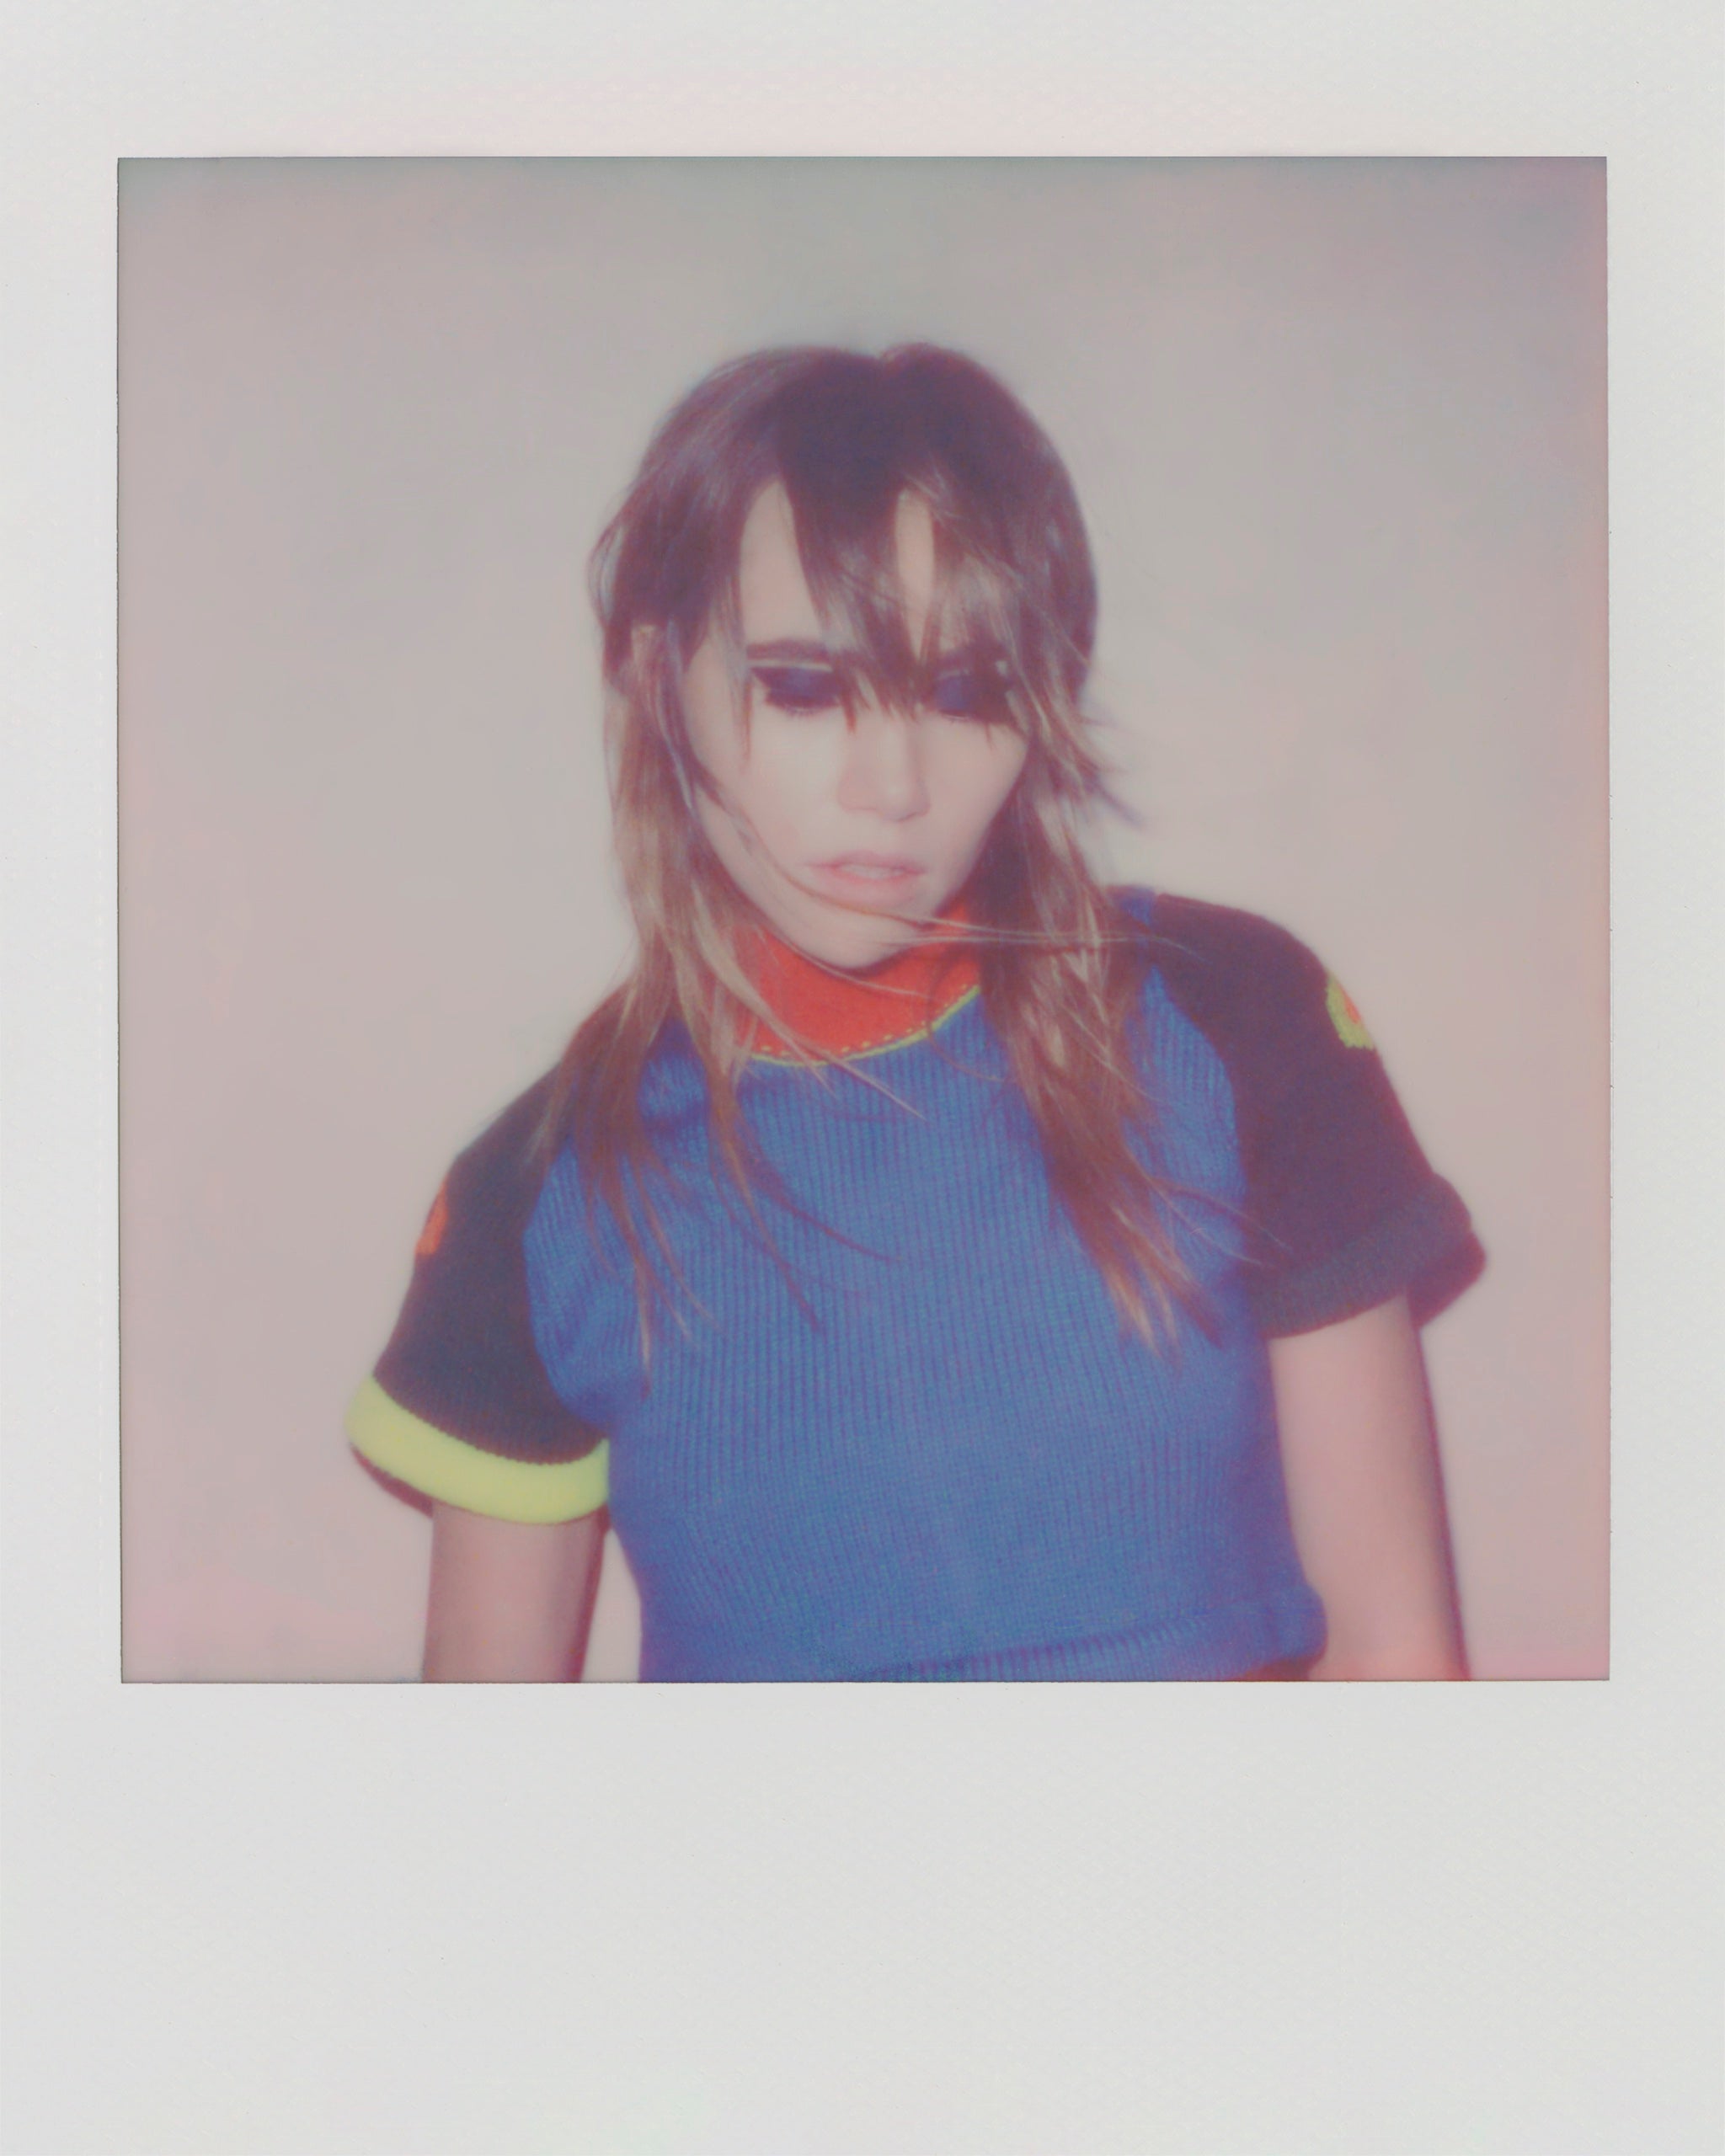 Suki Waterhouse has released her debut album ‘I Can’t Let Go’